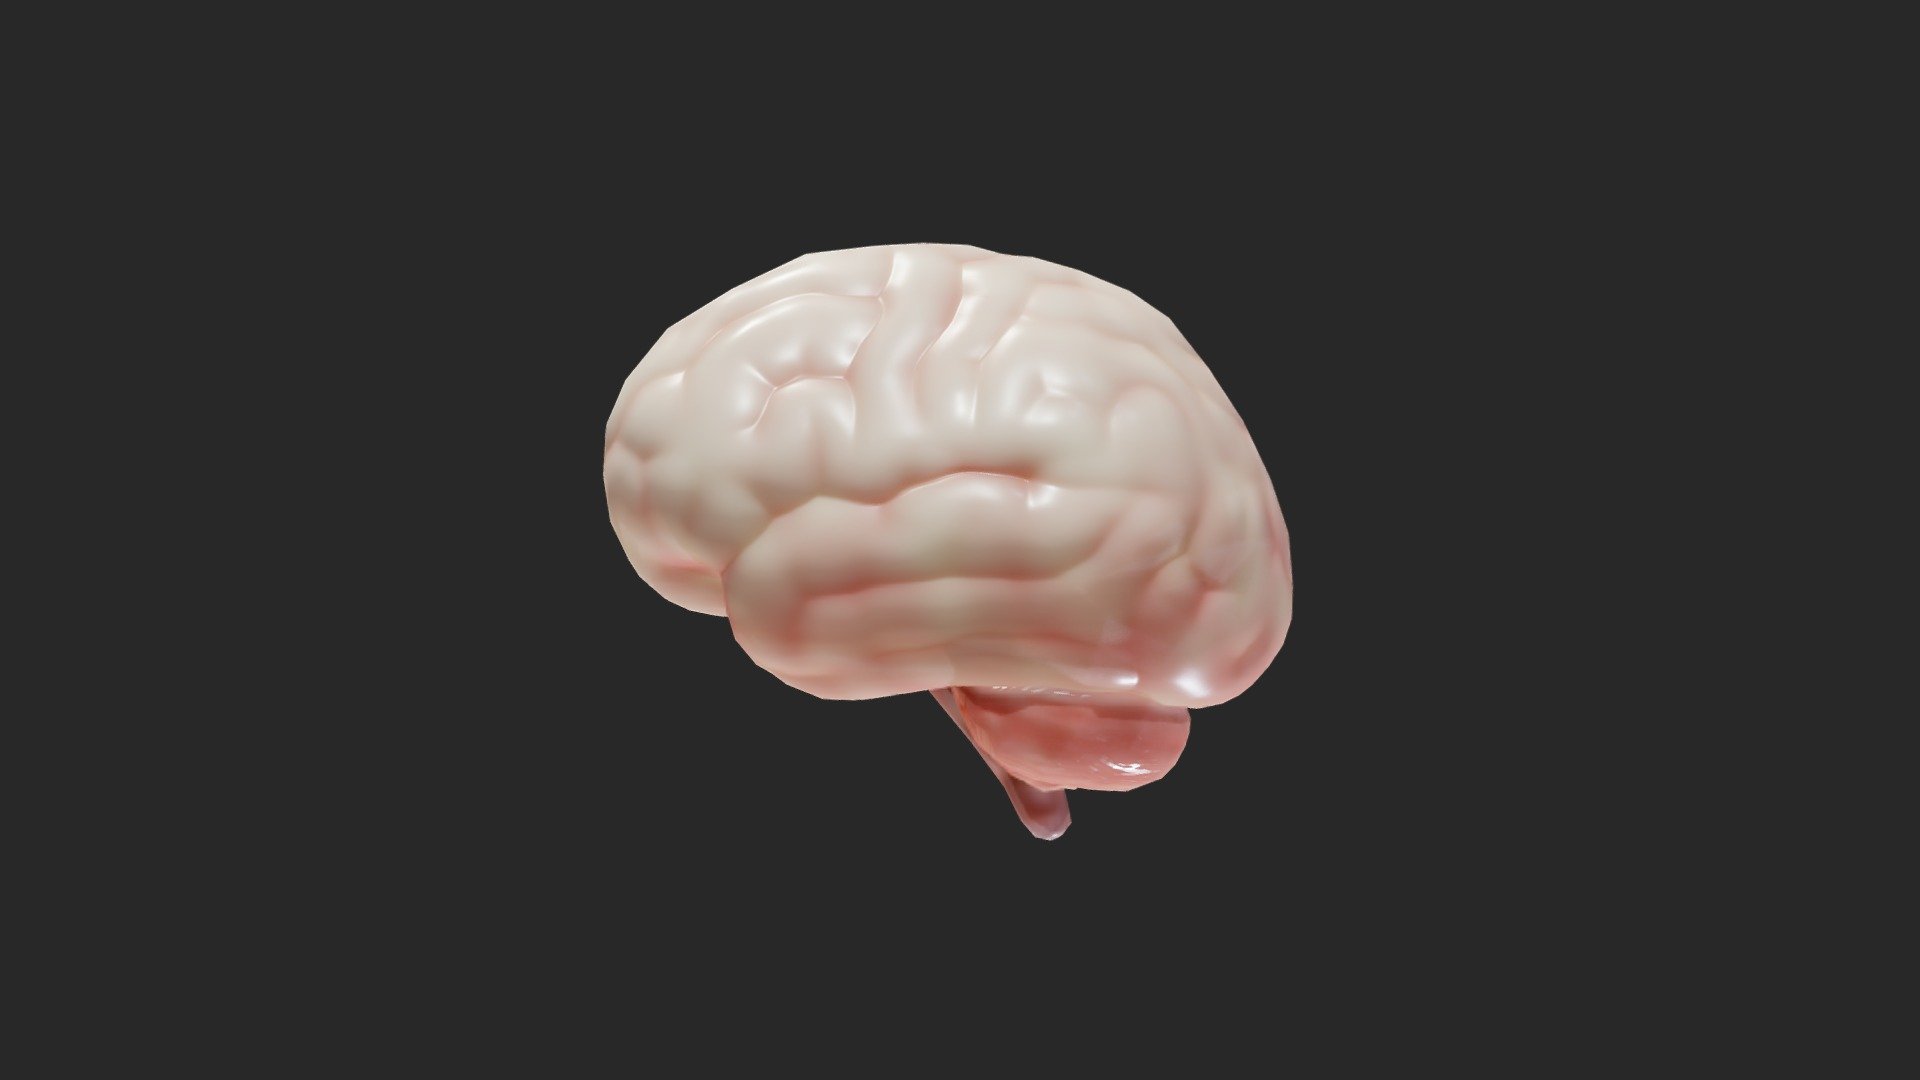 Originally modeled in Cinema 4D R 21 and Zbrush 2020



Maps for Human Brain




BaseColor

Metallic

Roughness

Normal

AO



SCALE:
- Model at world center and real scale:
       Metric in centimeter
       1 unit = 1 centimeter



Texture resolution 2048x2048
Texture format PNG



Poly Count :
Polygon Count - 2882
Vertex Count - 5752
No N-Gons - Human Brain - Buy Royalty Free 3D model by zames1992 3d model